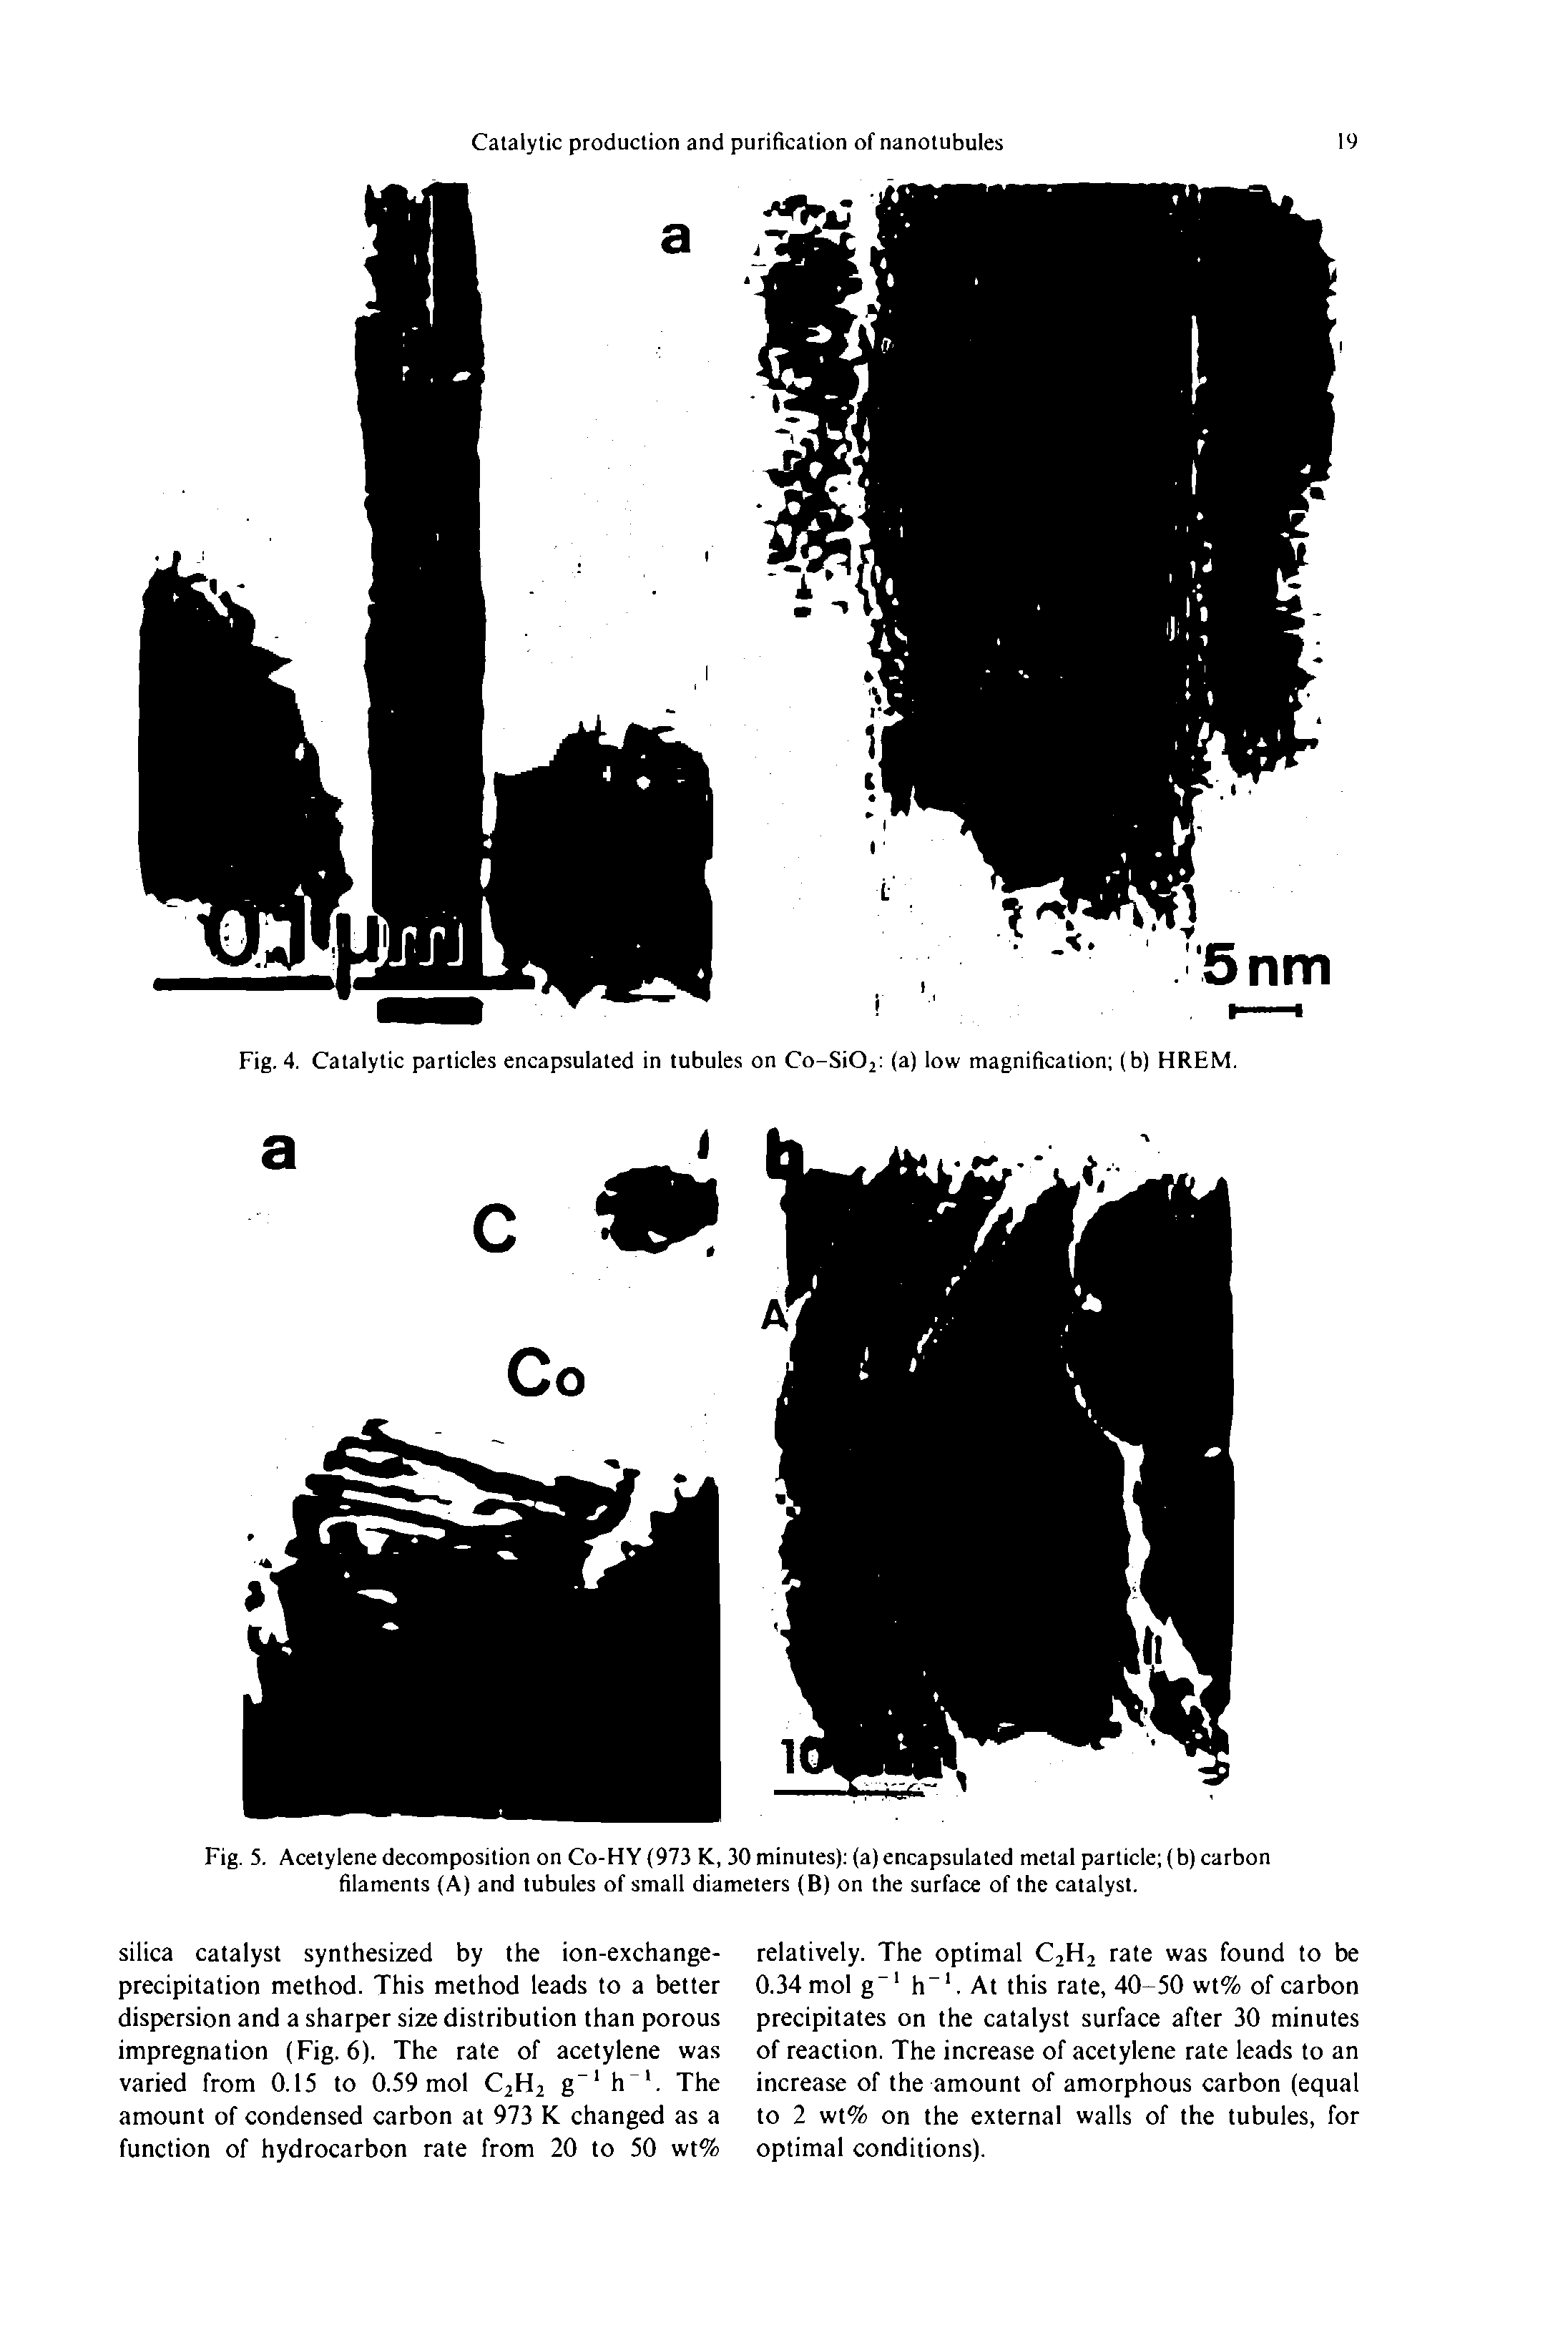 Fig. 5. Acetylene decomposition on Co-HY (973 K, 30 minutes) (a) encapsulated metal particle (b) carbon filaments (A) and tubules of small diameters (B) on the surface of the catalyst.